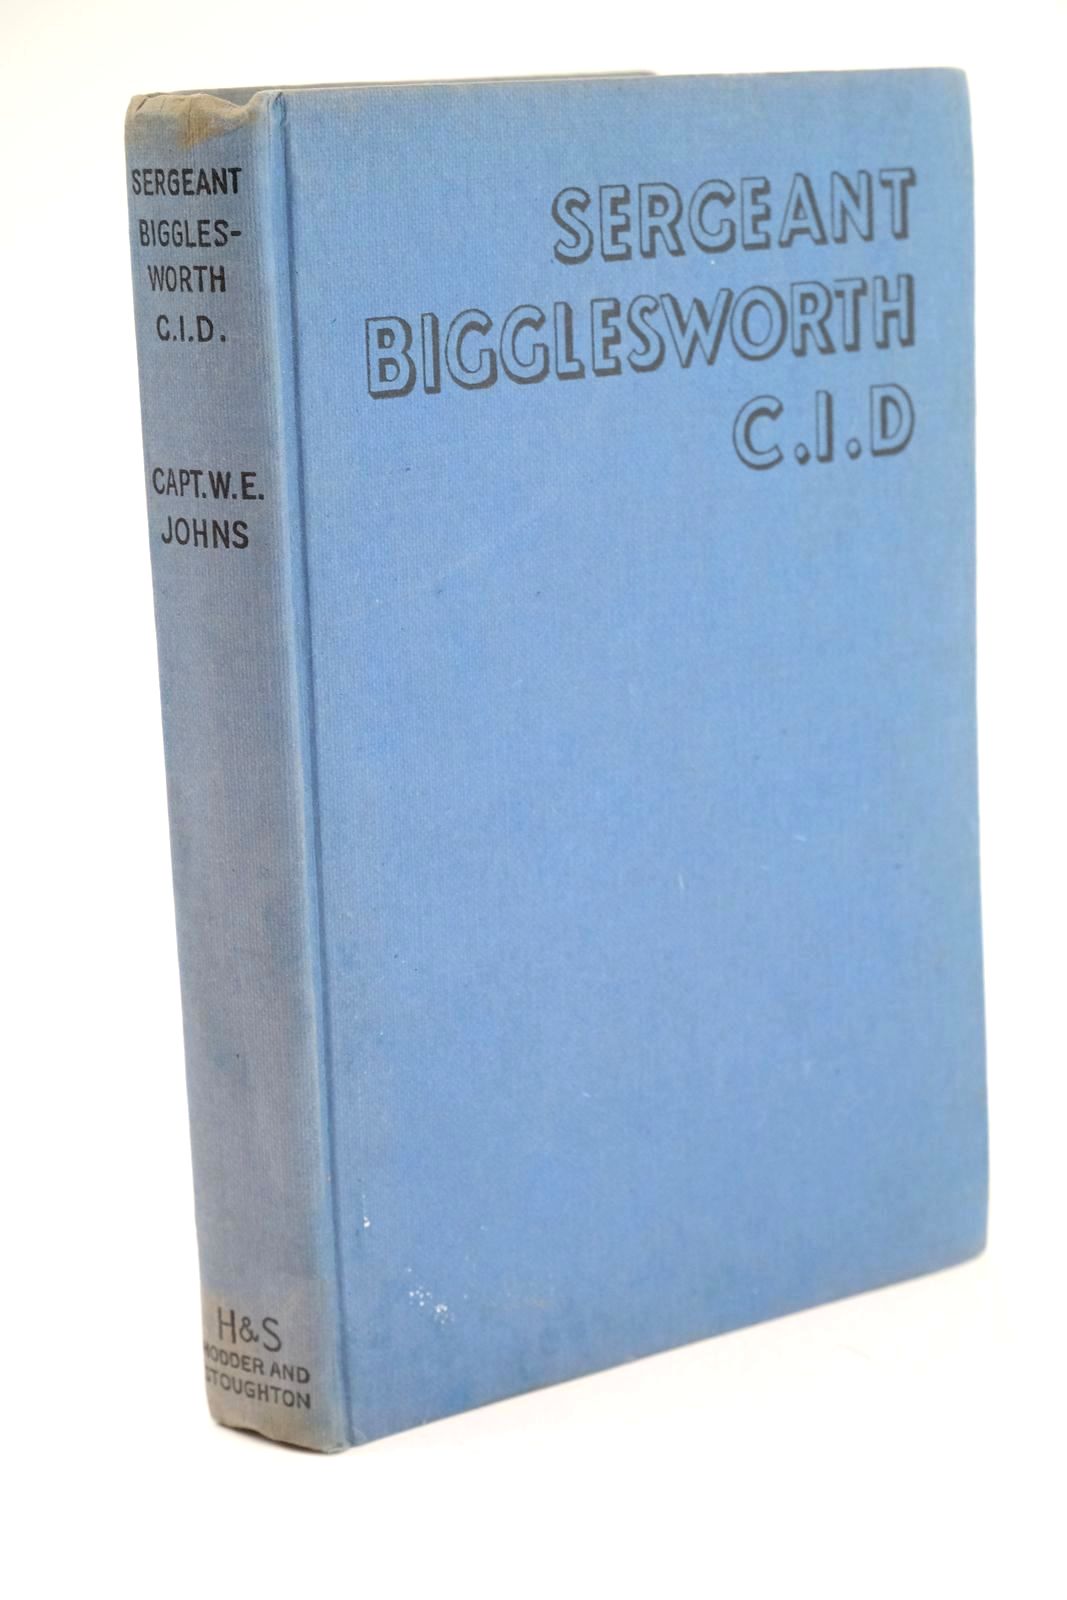 Photo of SERGEANT BIGGLESWORTH C.I.D. written by Johns, W.E. illustrated by Stead,  published by Hodder & Stoughton (STOCK CODE: 1324852)  for sale by Stella & Rose's Books